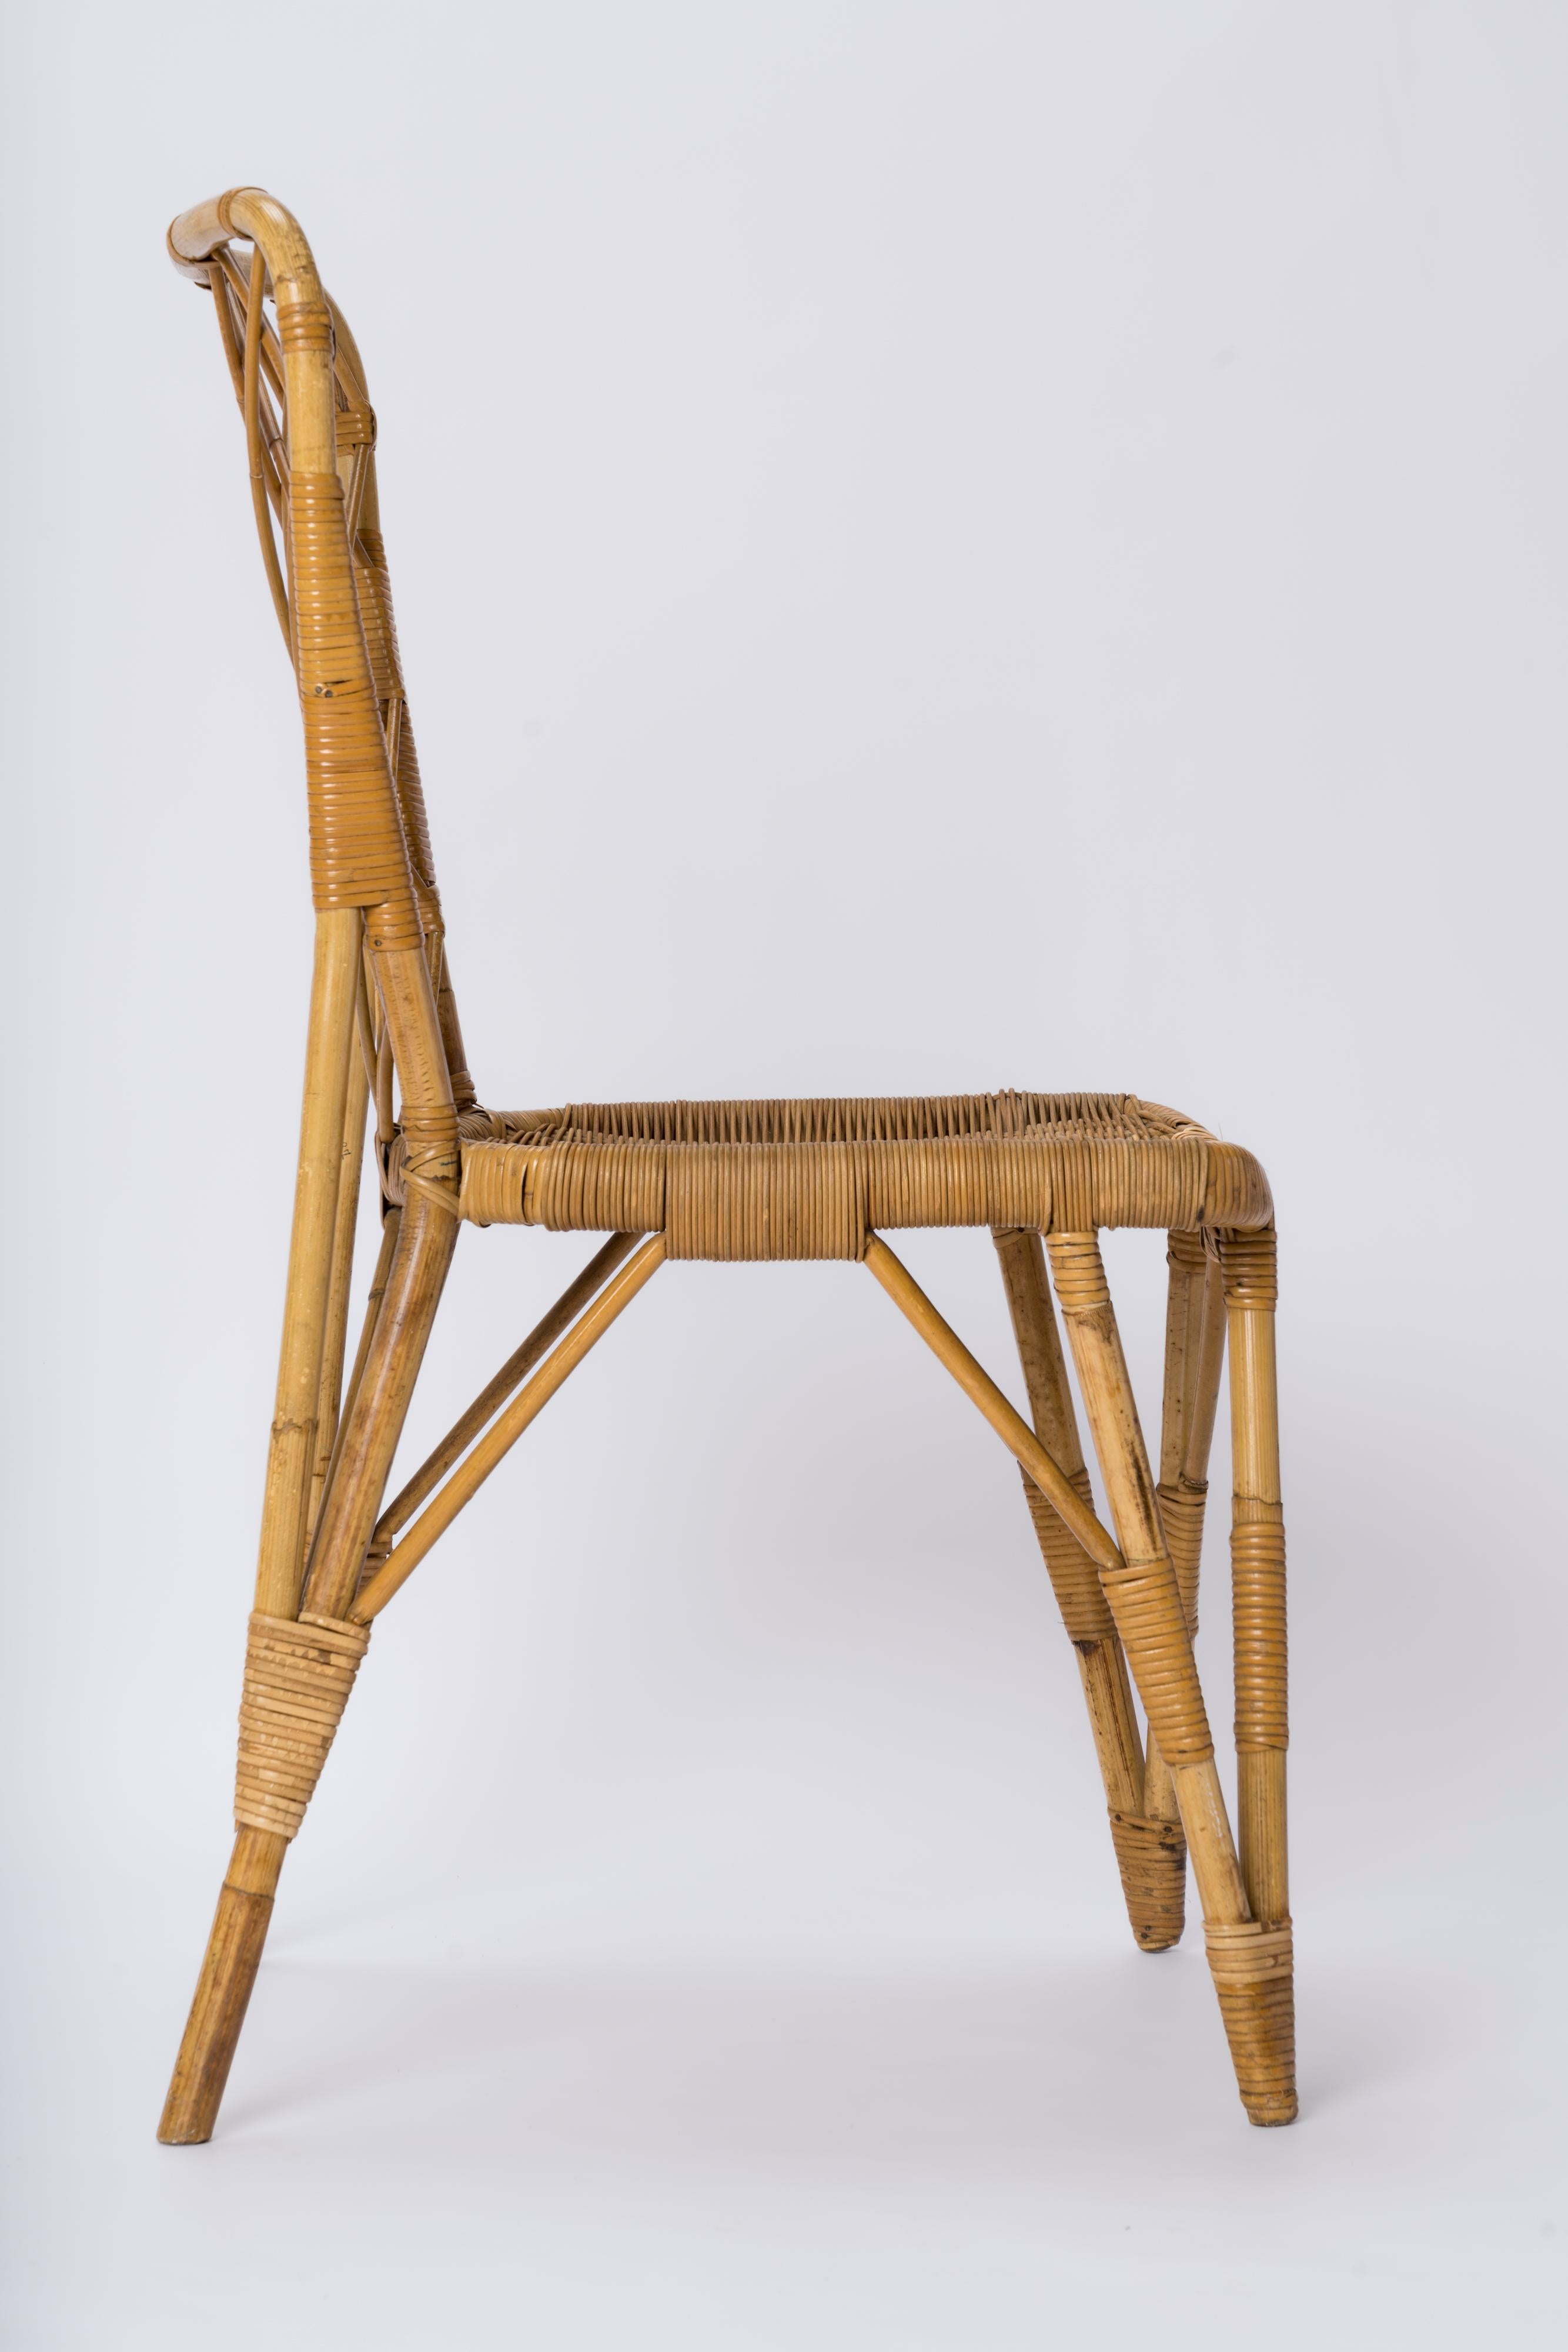 Mid-20th Century Rattan Chair with Braided Back in the style of Louis Sognot - France 1960's For Sale